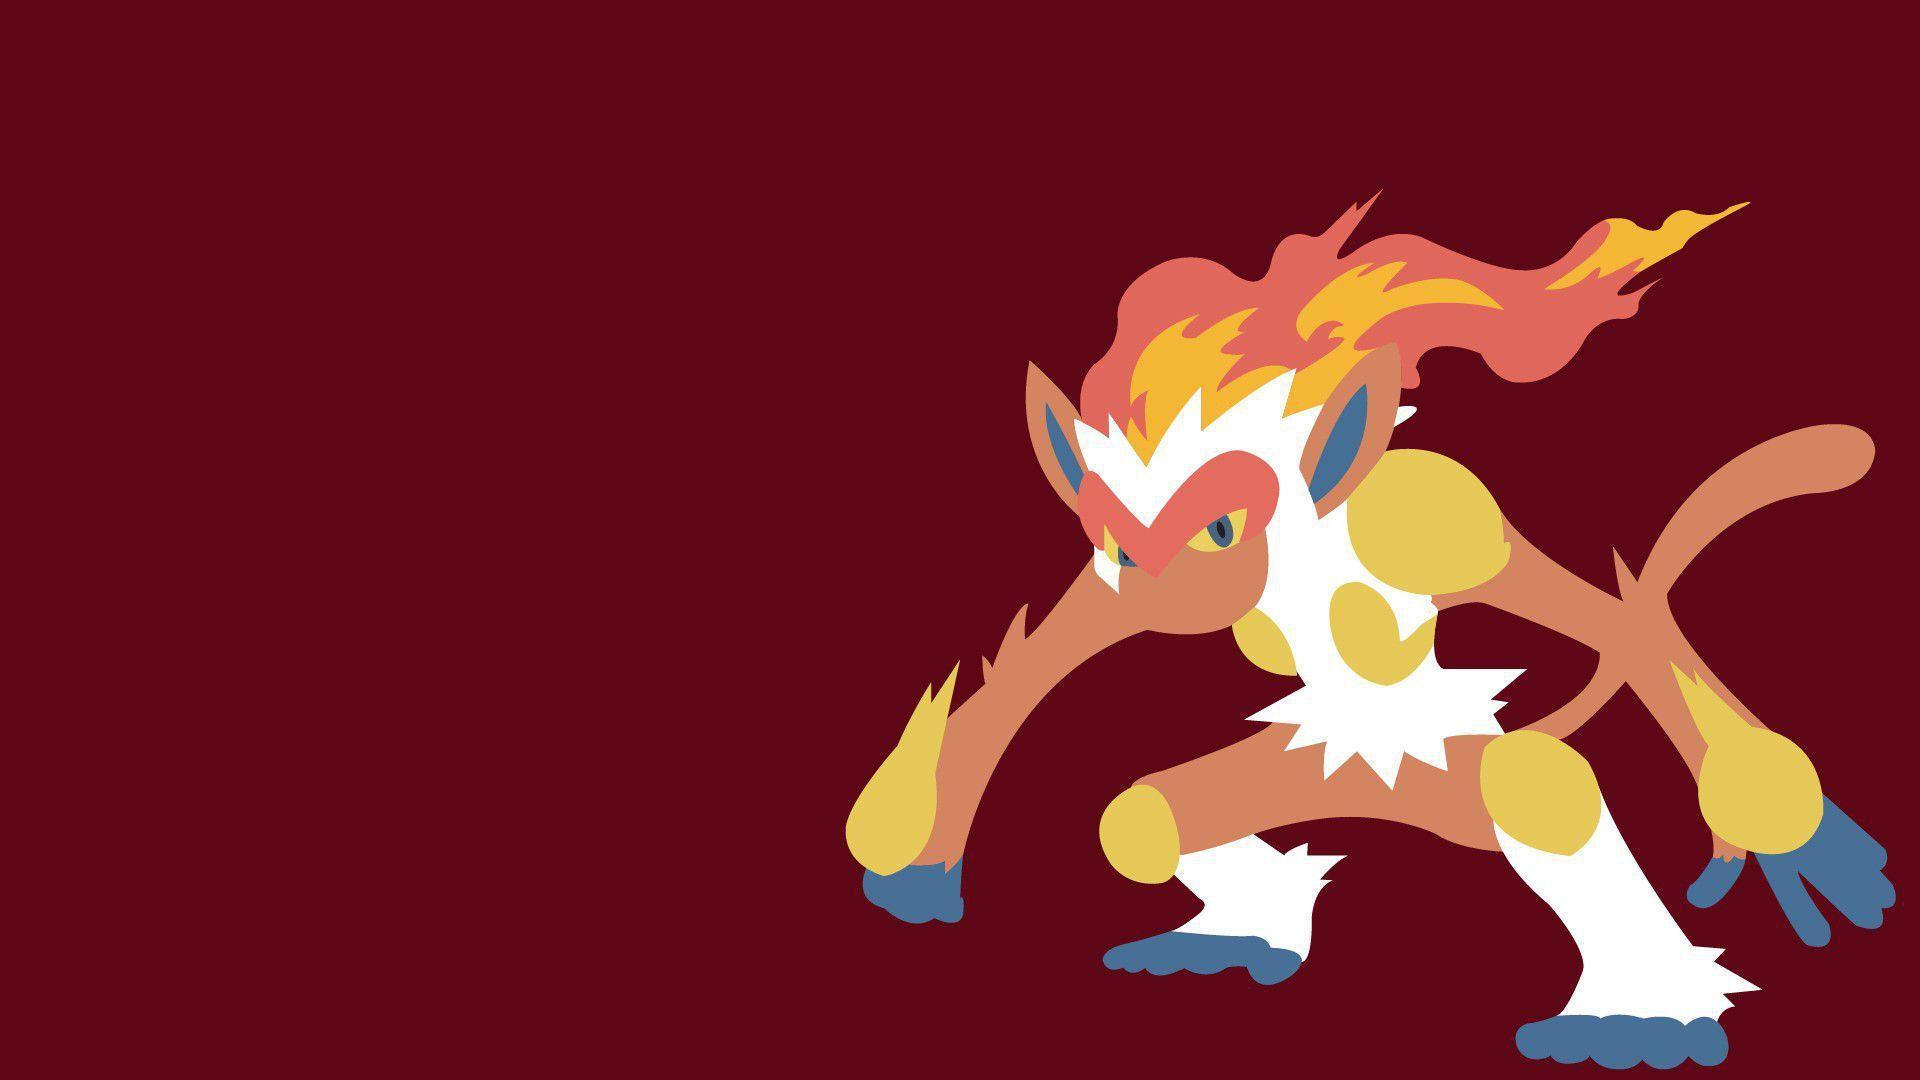 Infernape Wallpapers Image Photos Pictures Backgrounds